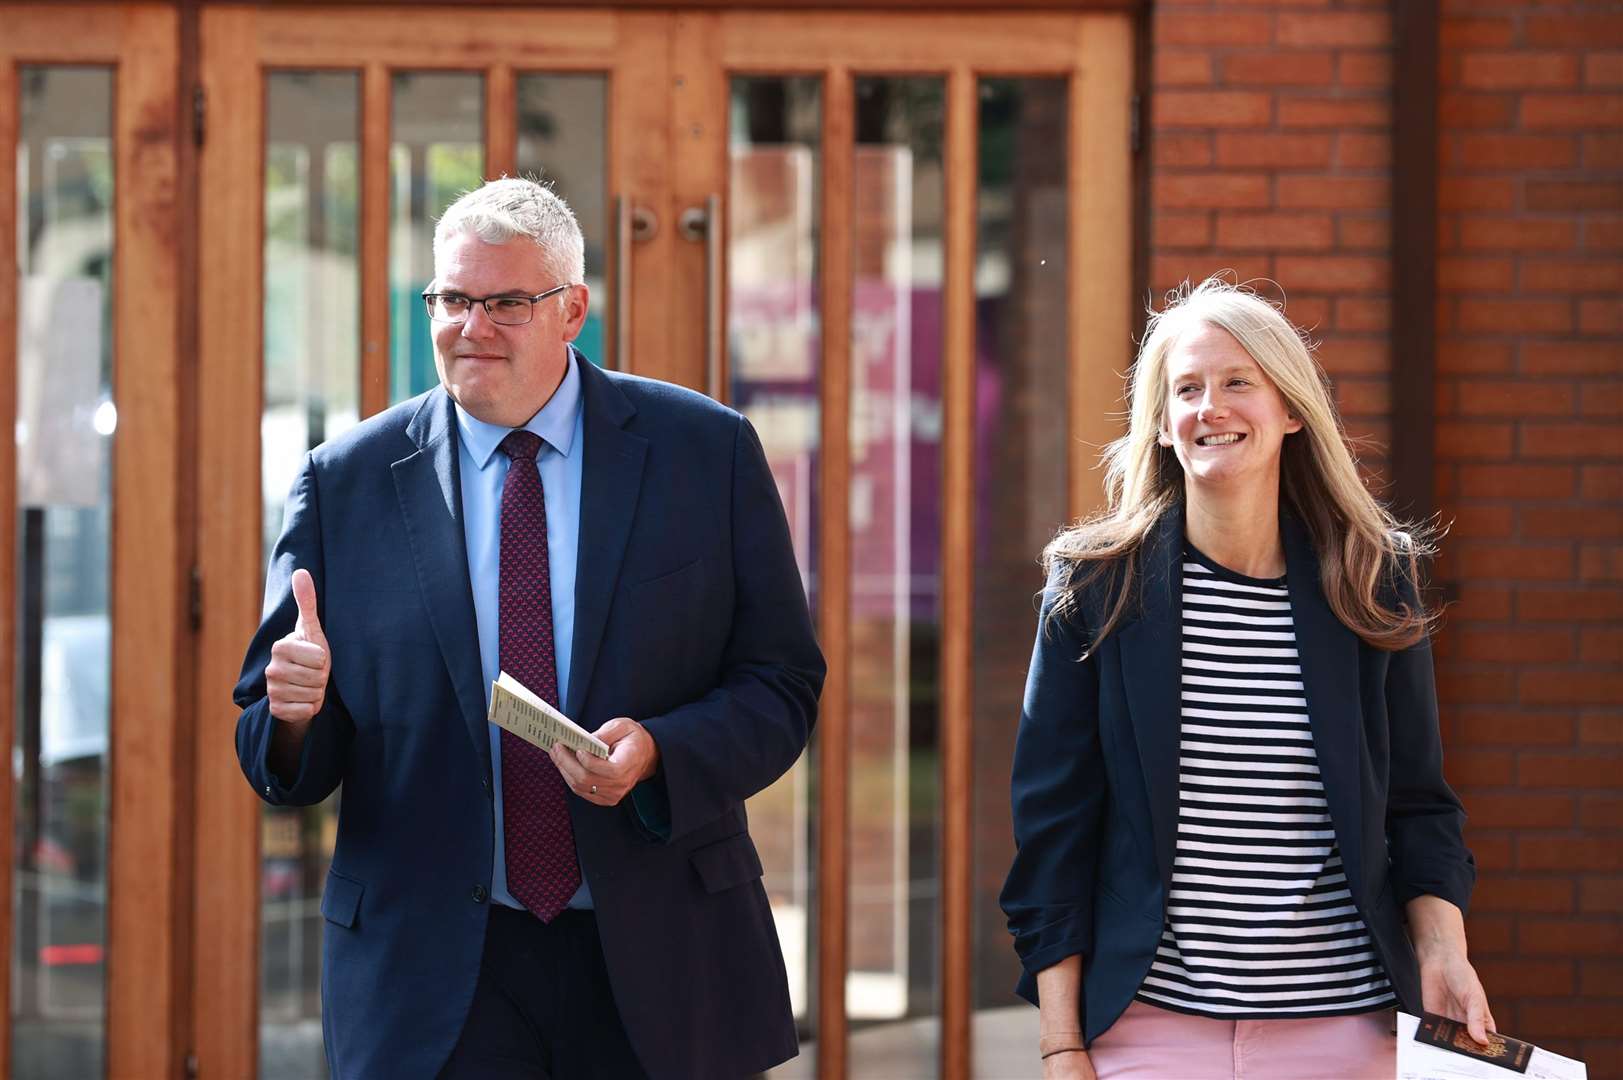 DUP leader Gavin Robinson and his wife Lindsay leave after casting their votes at Dundonald Elim Church in Belfast (Liam McBurney/PA)